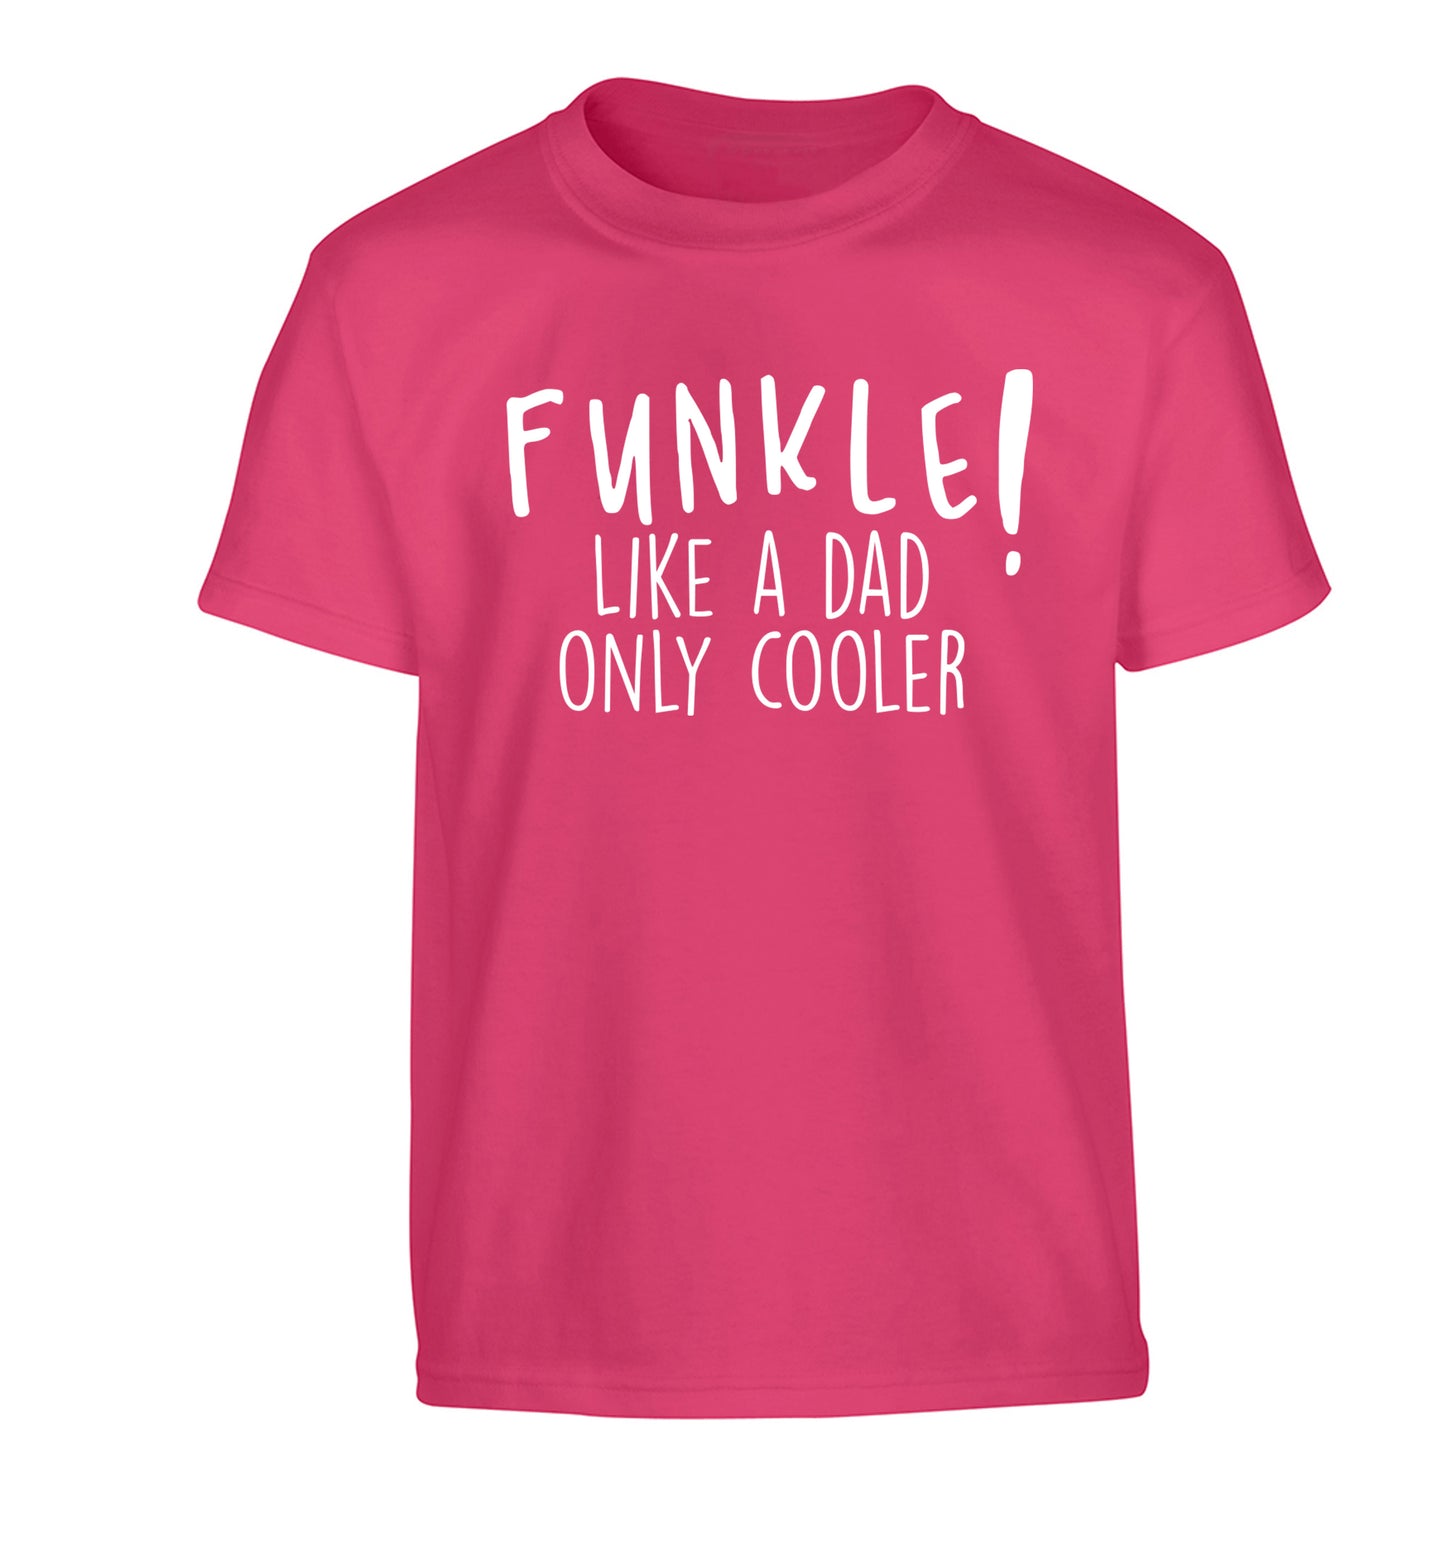 Funkle Like a Dad Only Cooler Children's pink Tshirt 12-13 Years